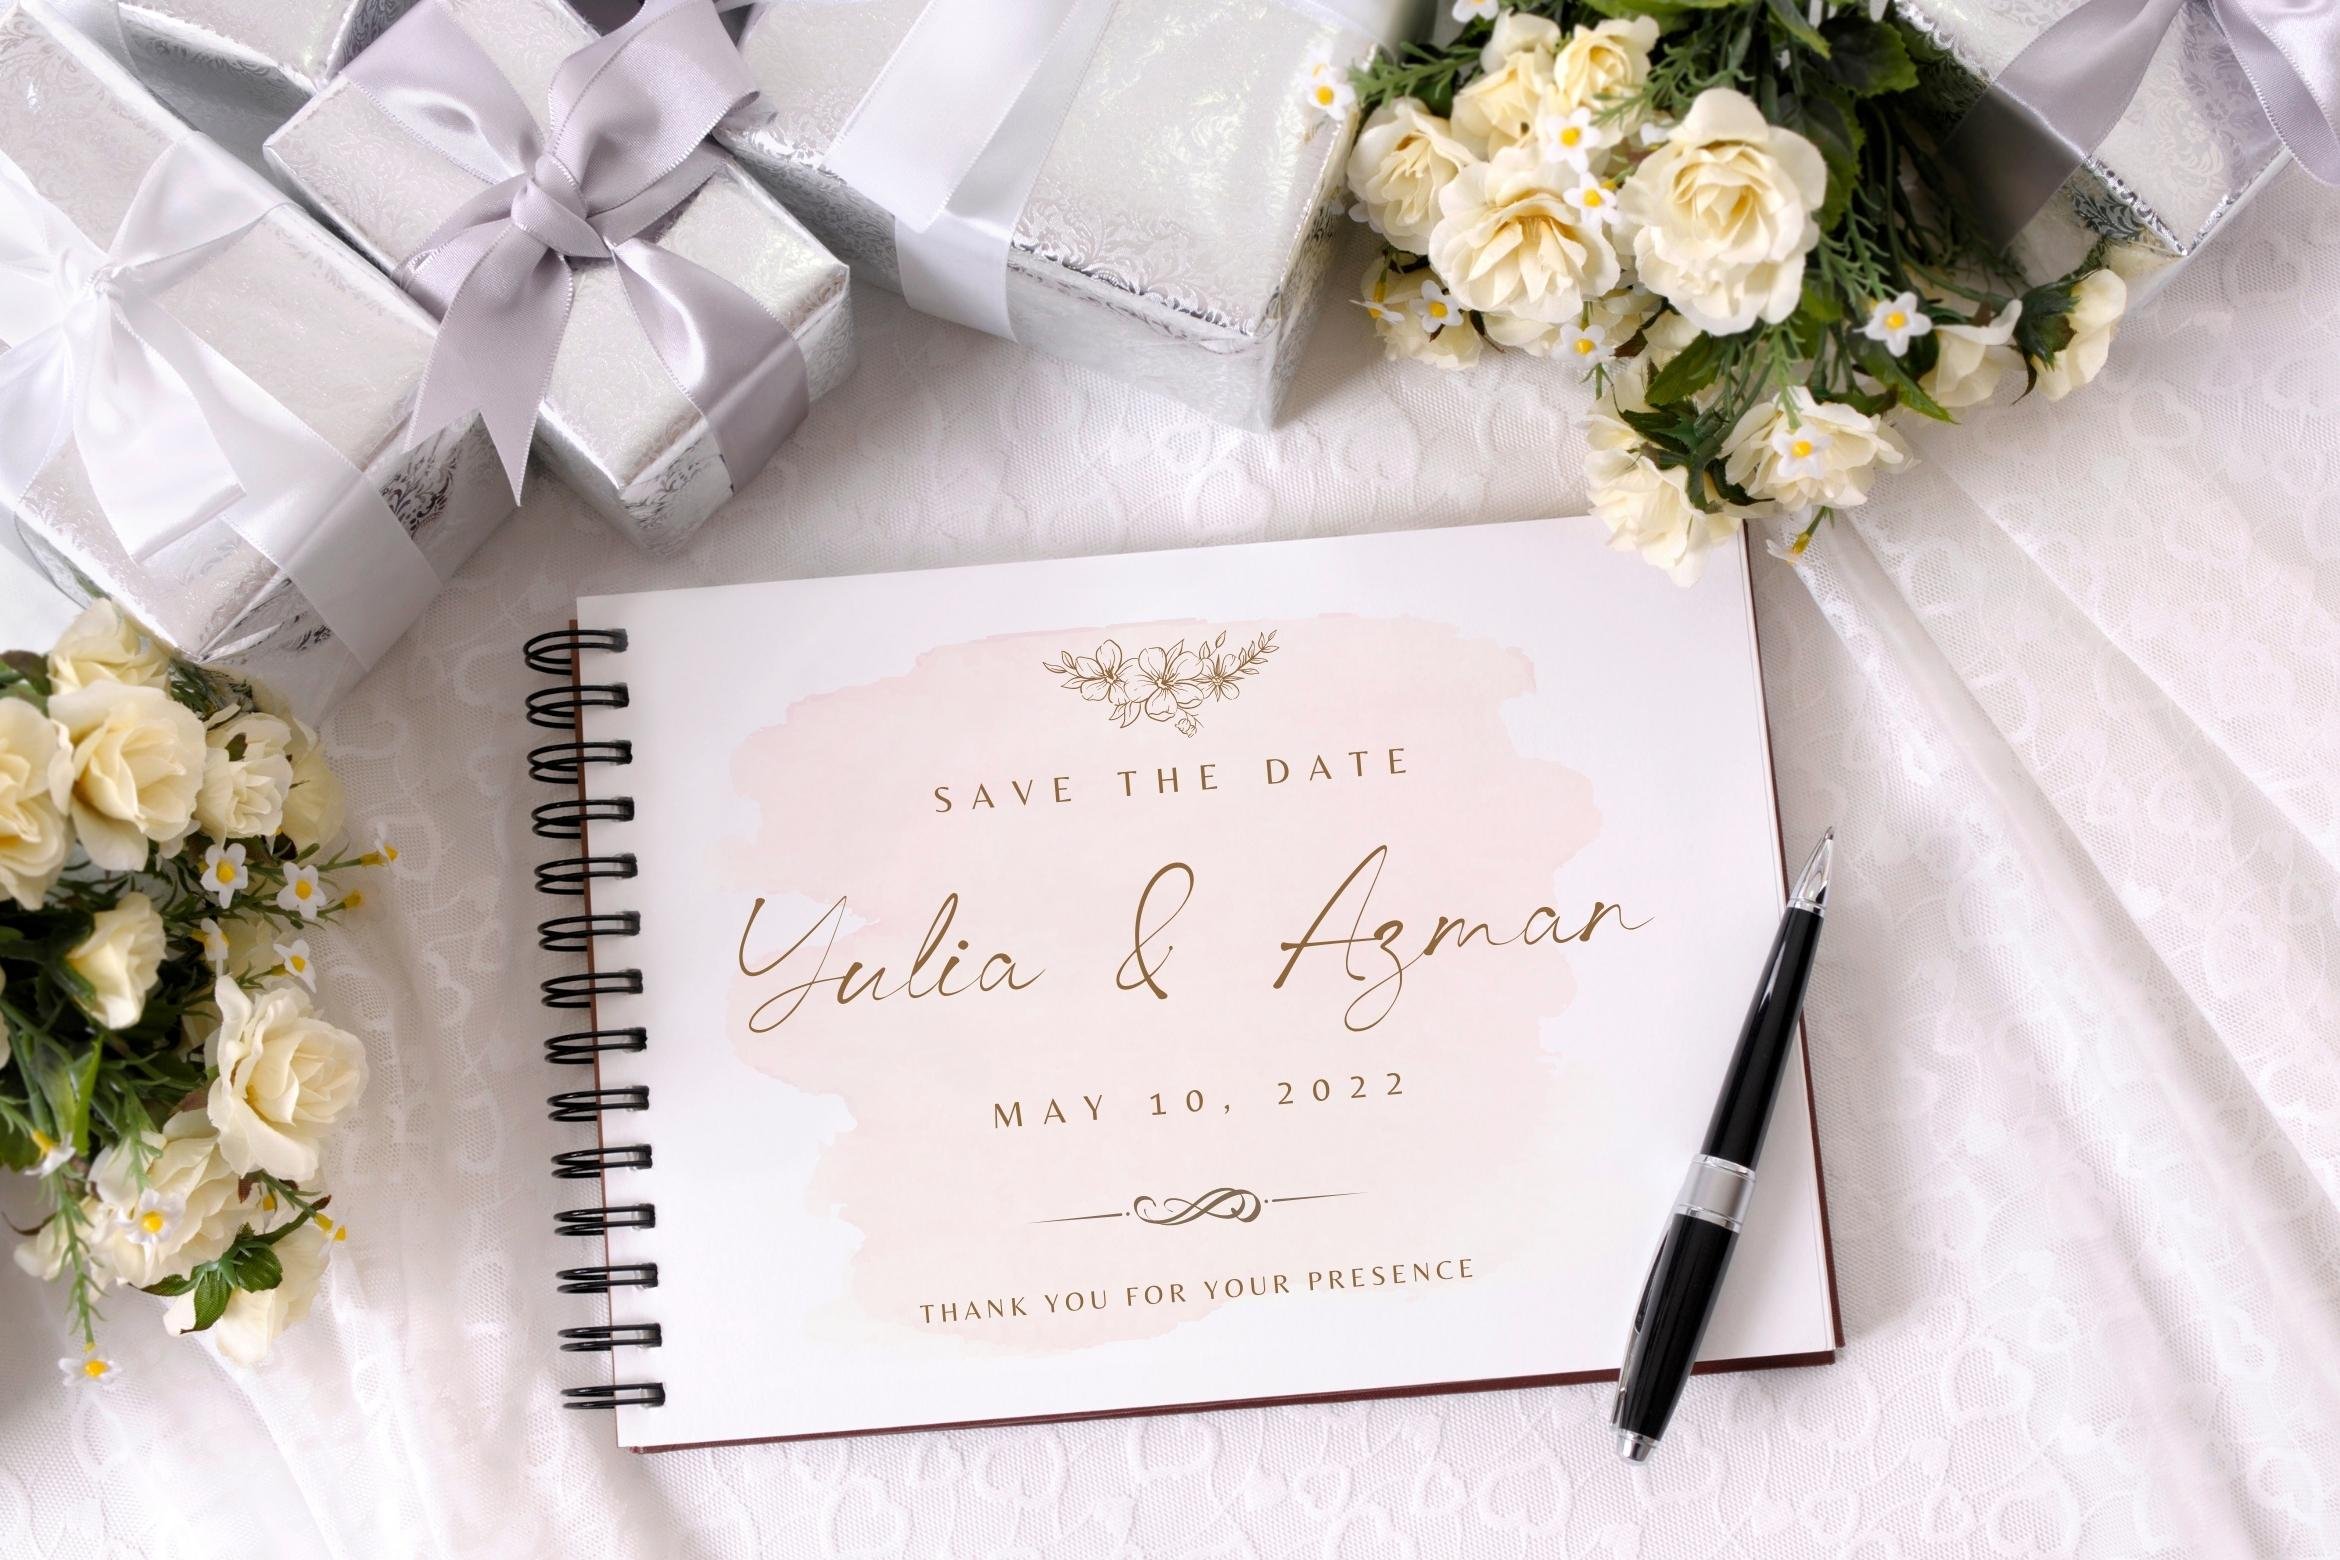 A wedding card and a pen on a table.